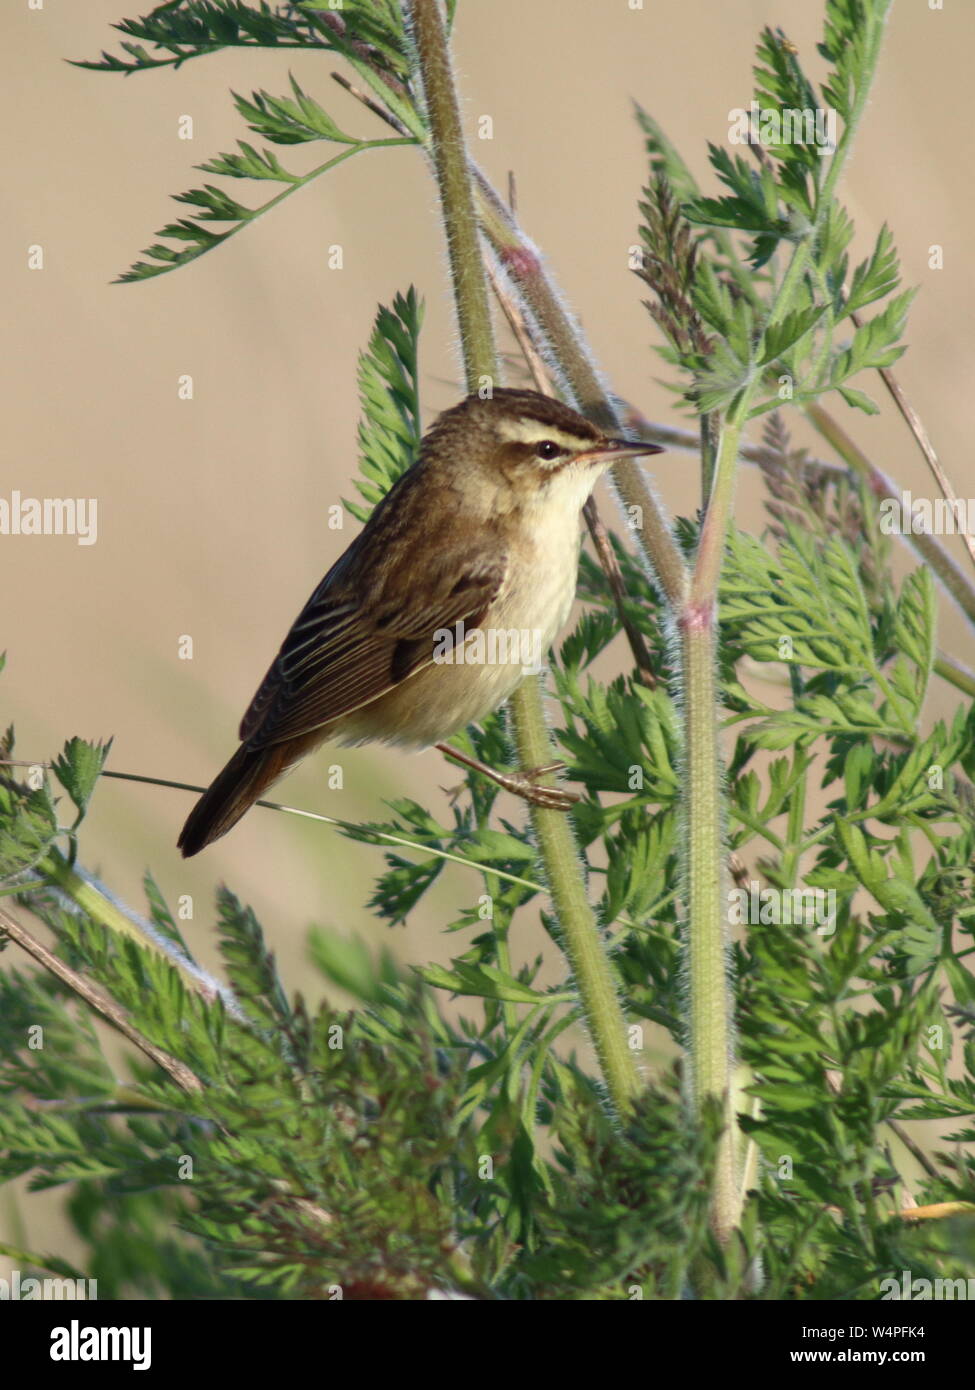 Sedge Warbler, Acrocephalus schoenobaenus, perched on plant stem in full view, a summer visitor that comes here to breed. Stock Photo